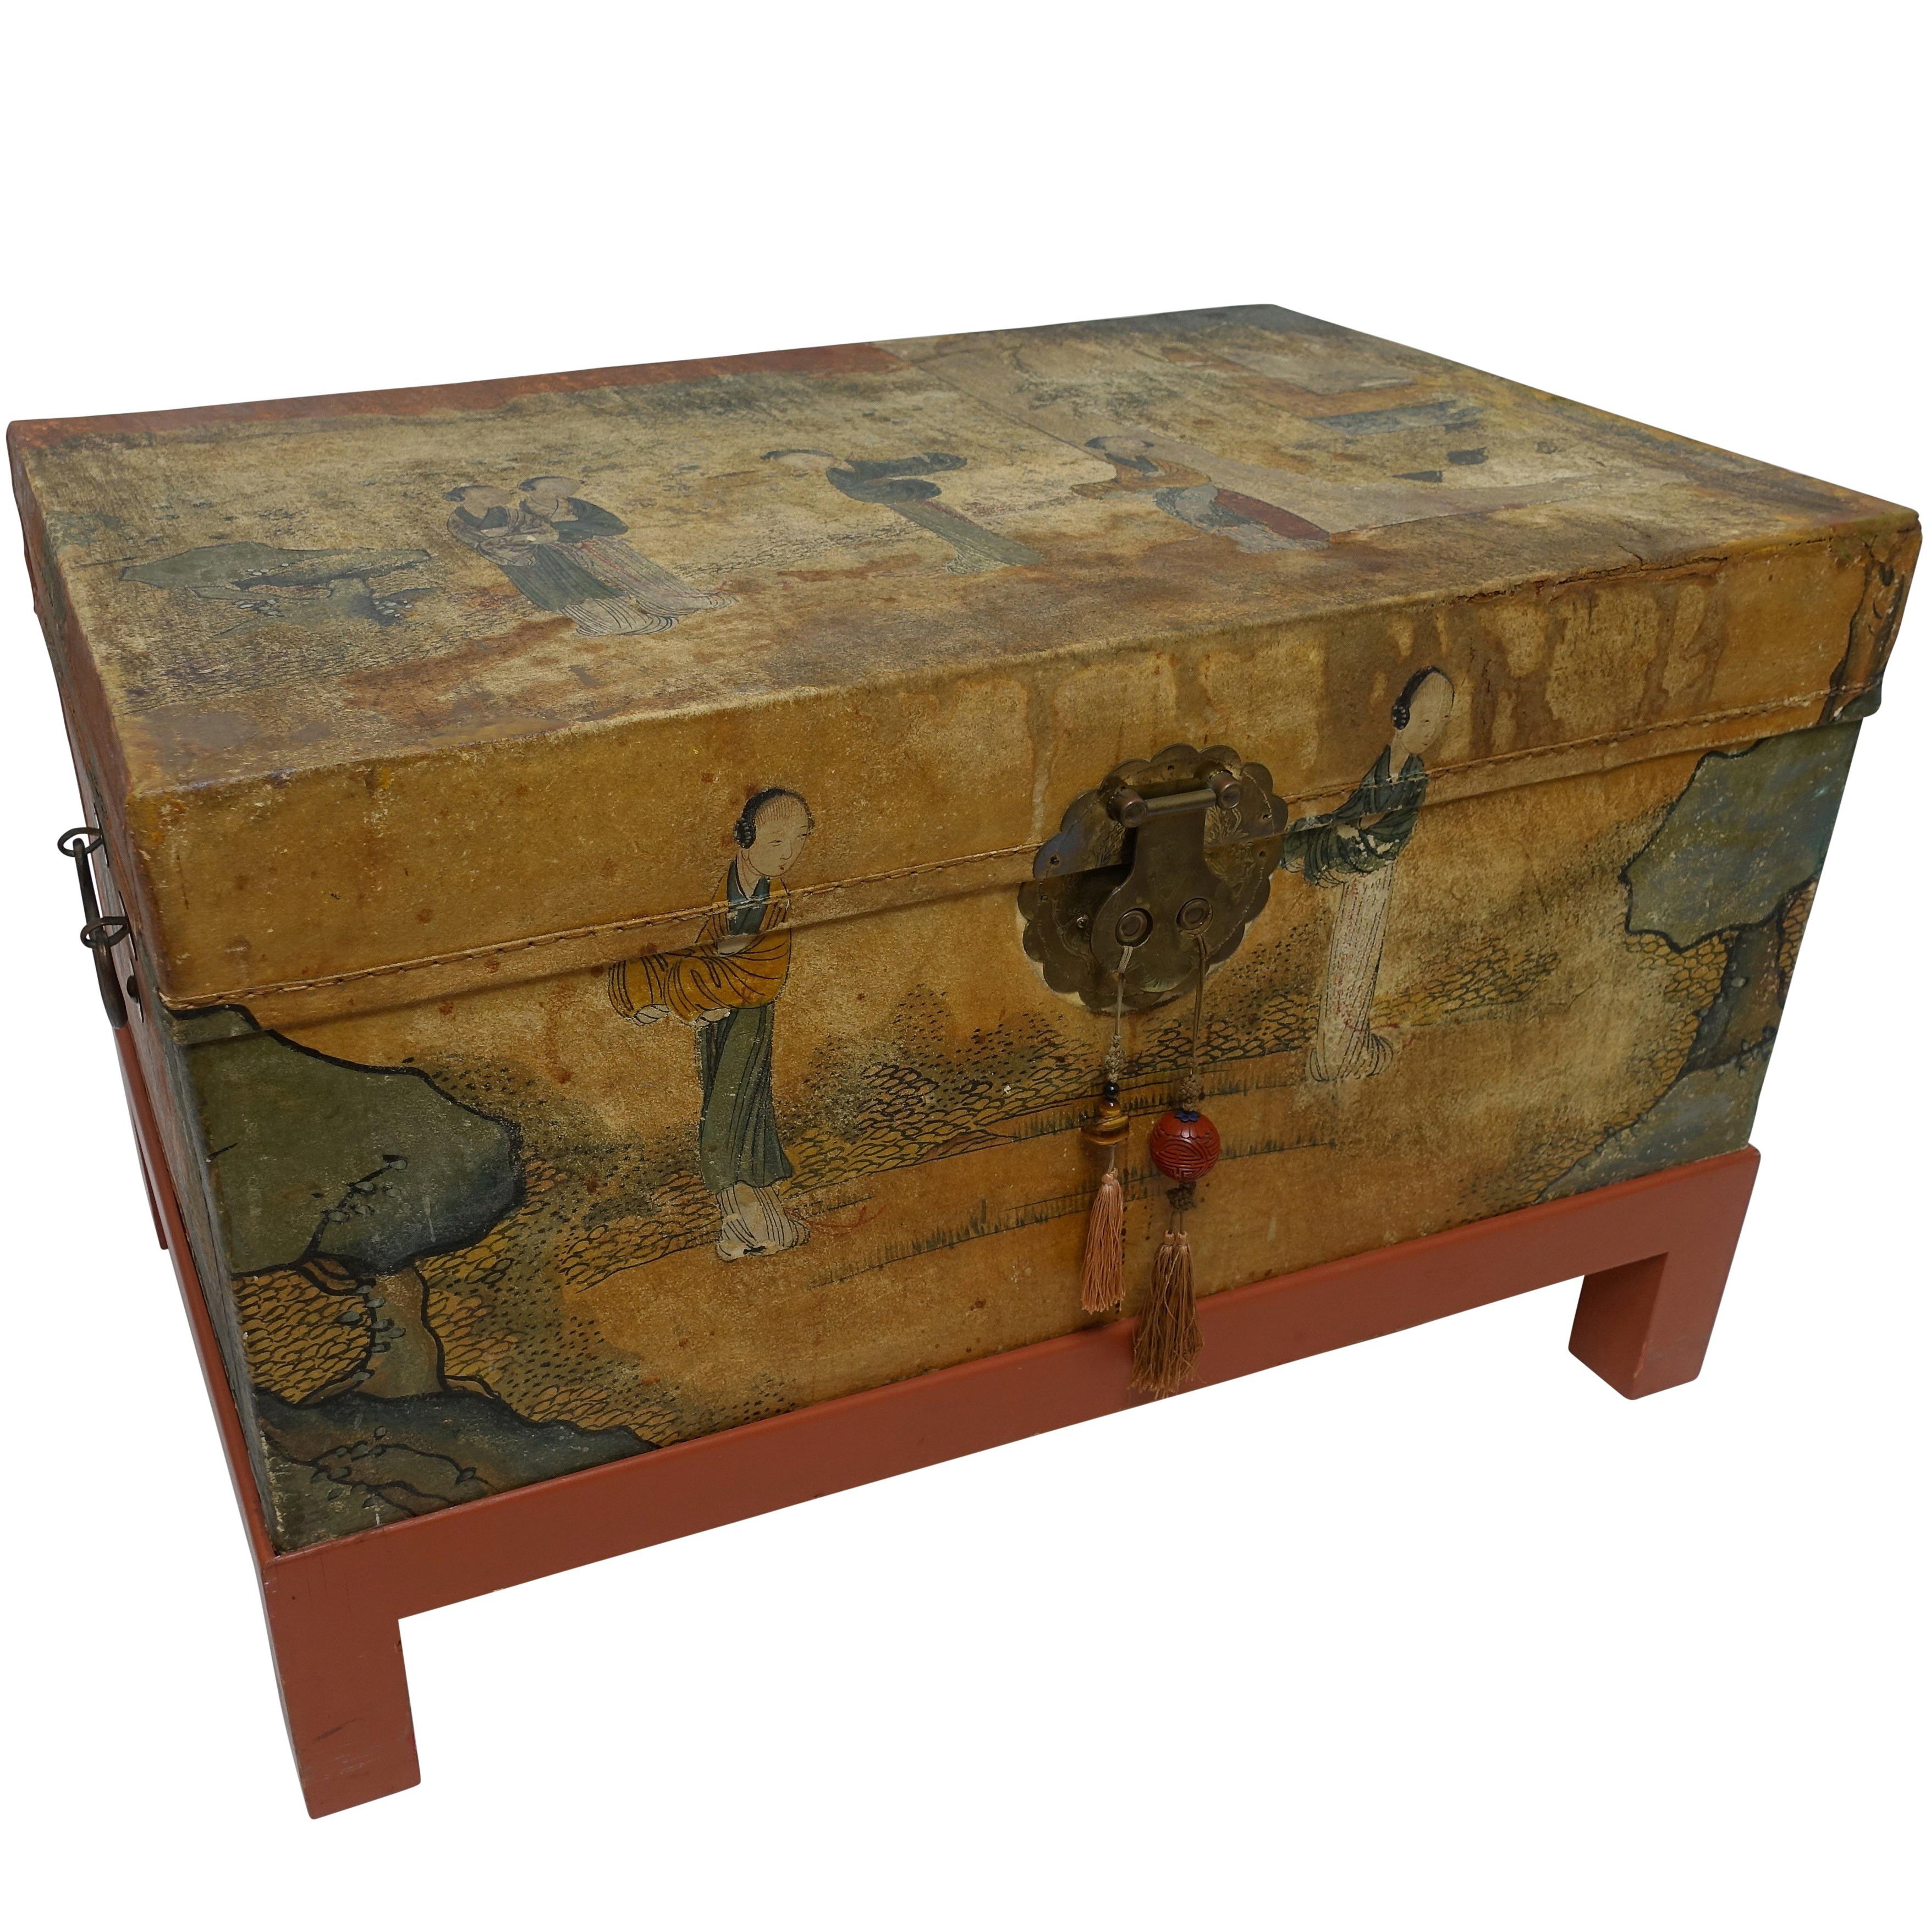 Chinese Export Hand-Painted Leather Trunk on Stand, Early 20th Century